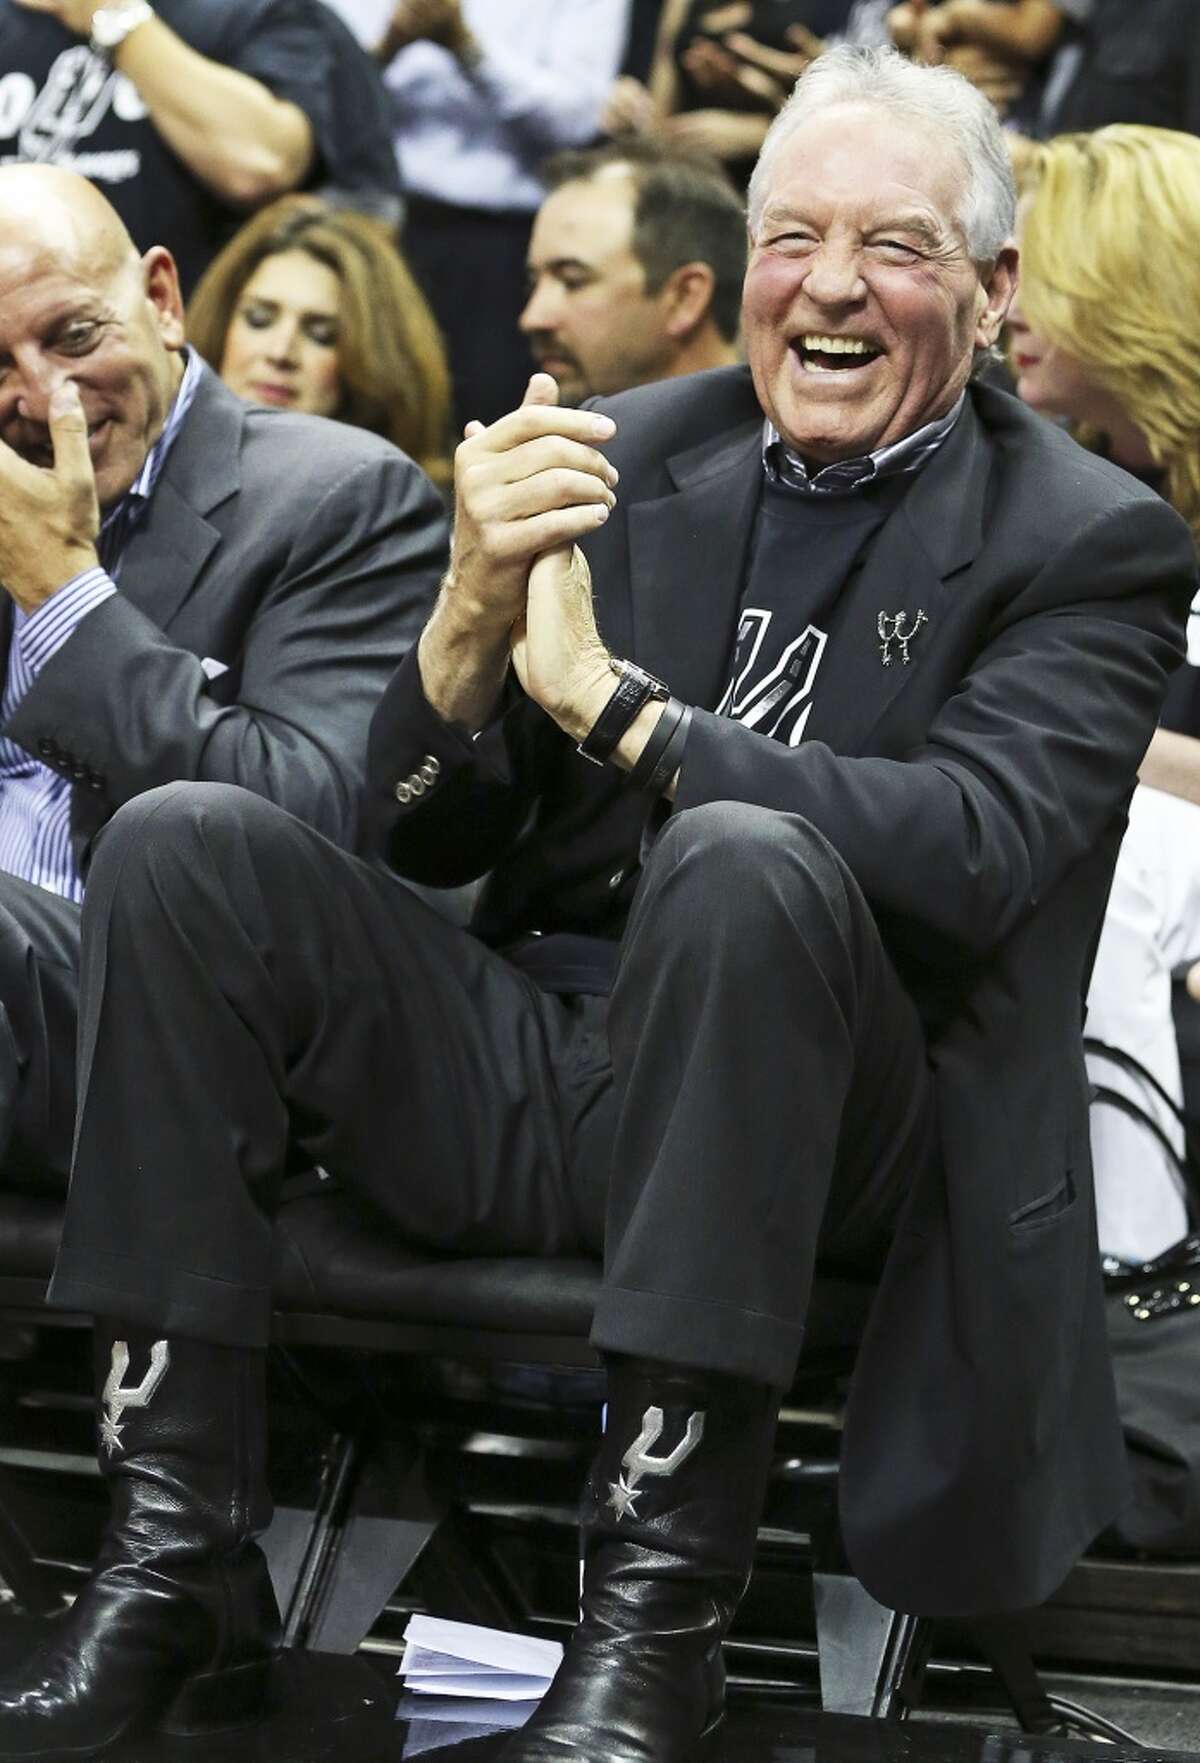 Peter Holt enjoys the second half as the Spurs play the Thunder in the opener of the NBA Western Conference finals at the AT&T Center on May 19, 2014.